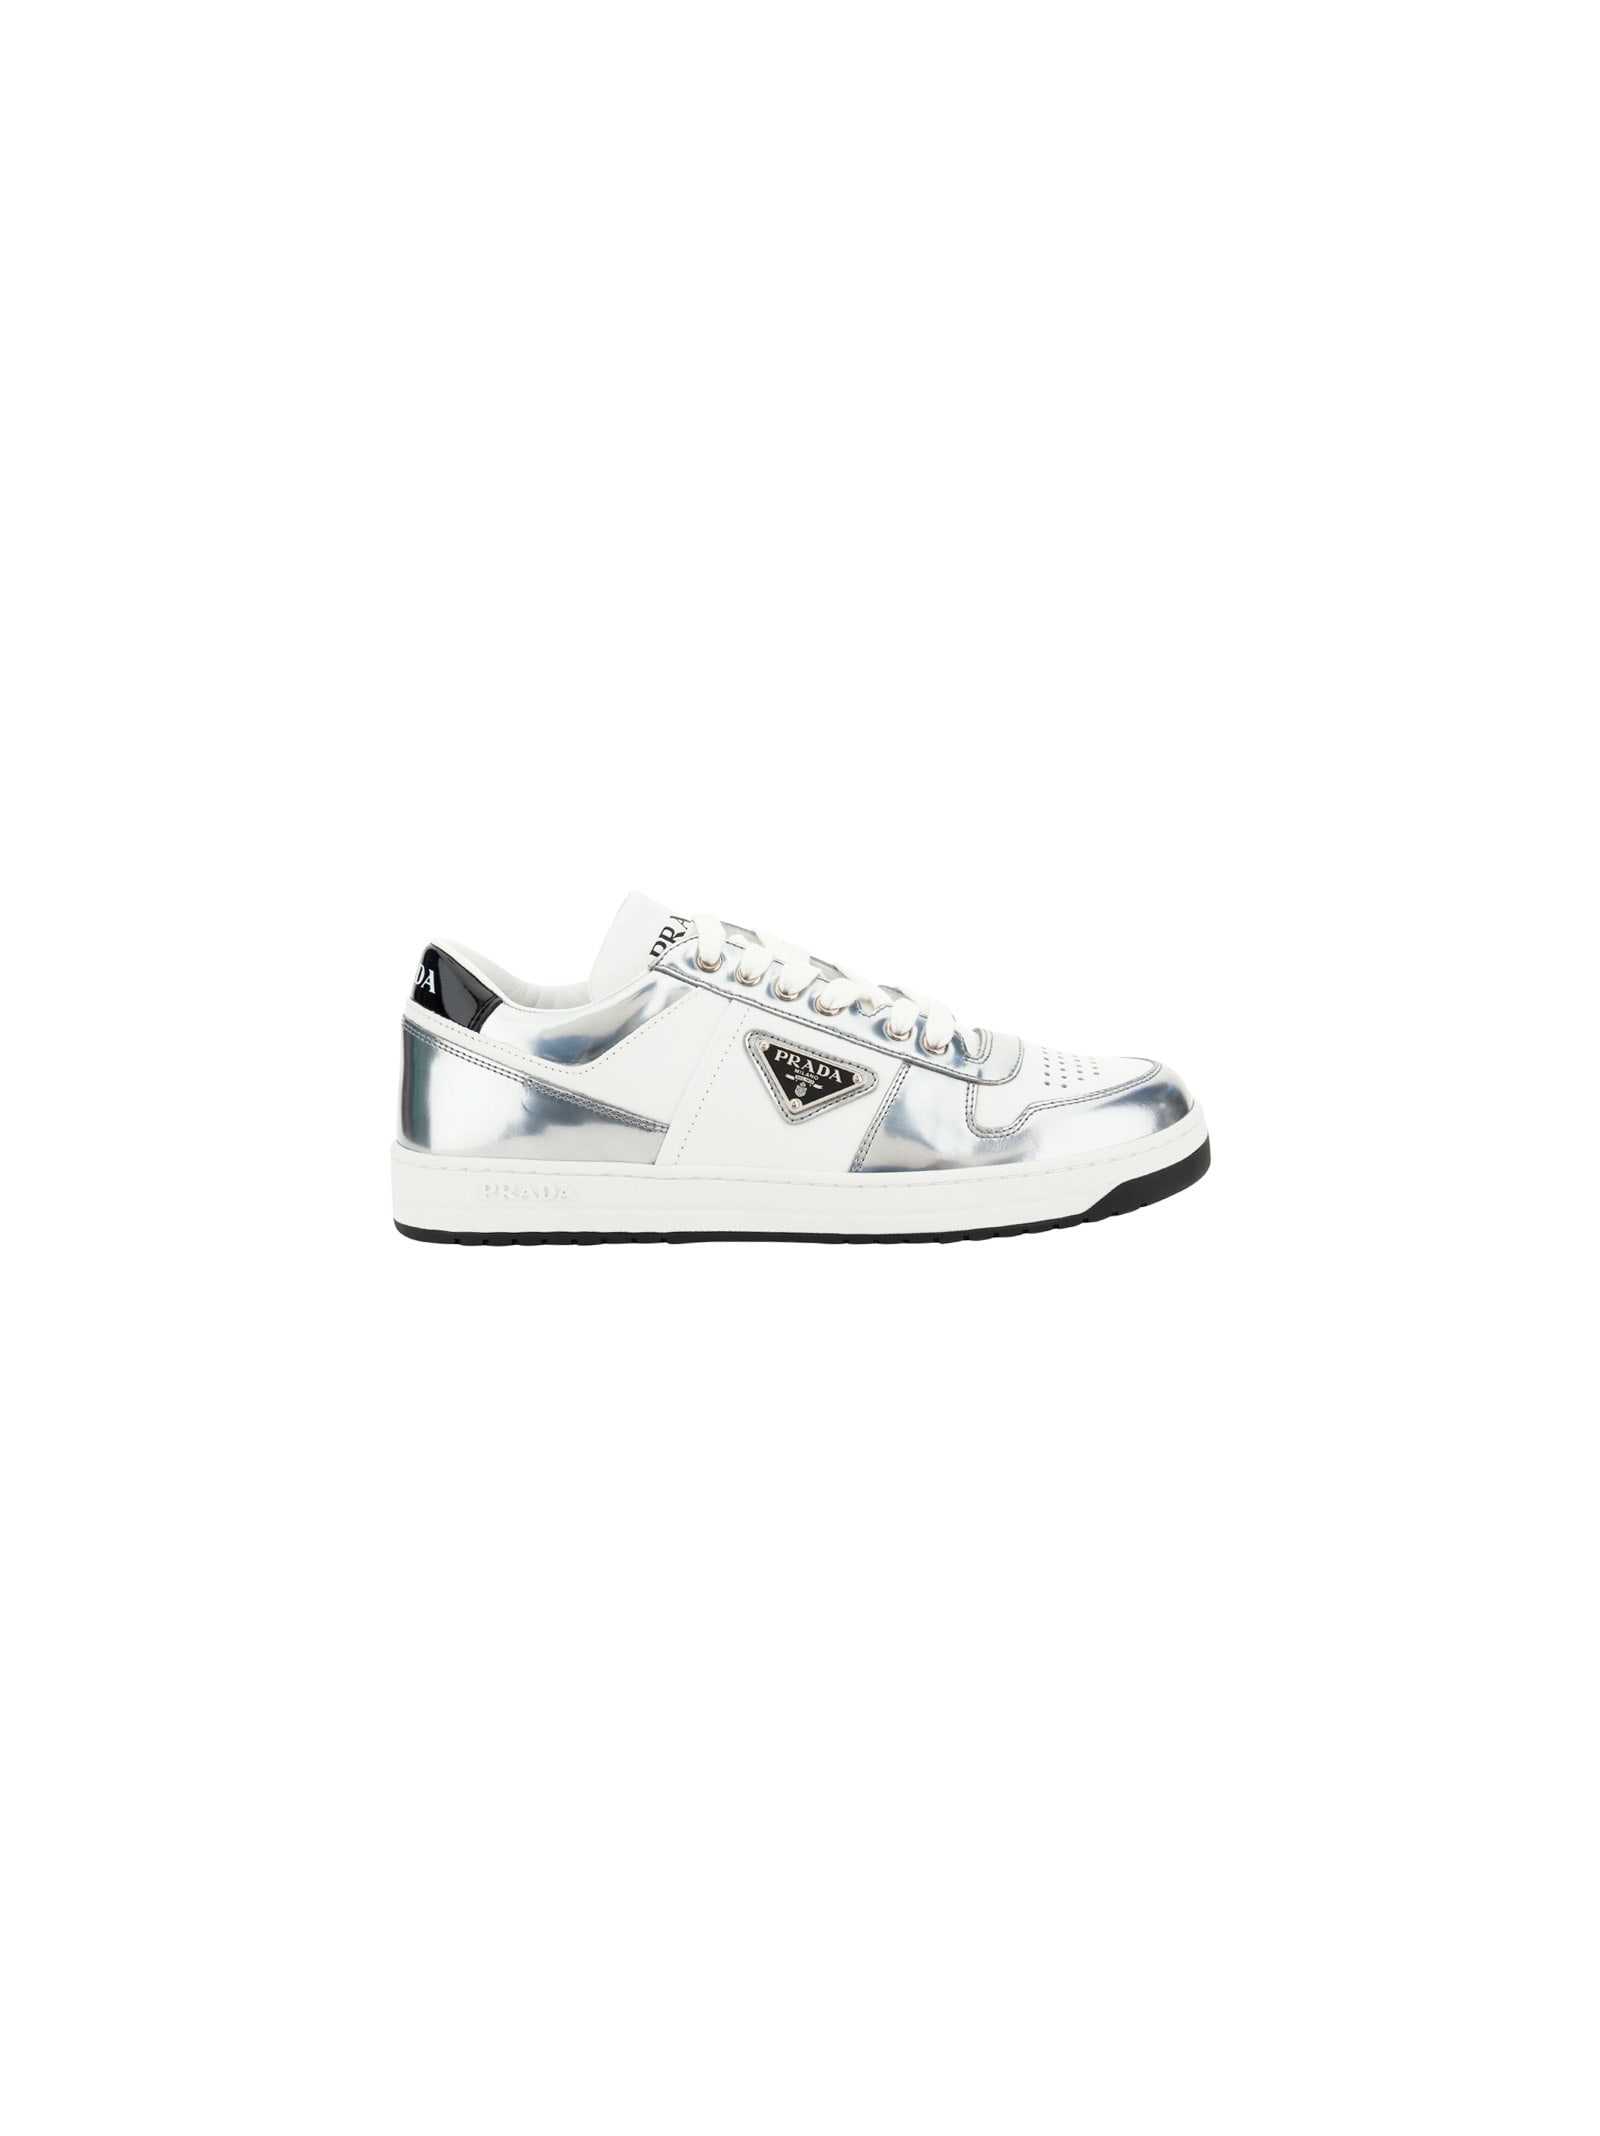 Prada Downtown Sneakers In Bianco+argento